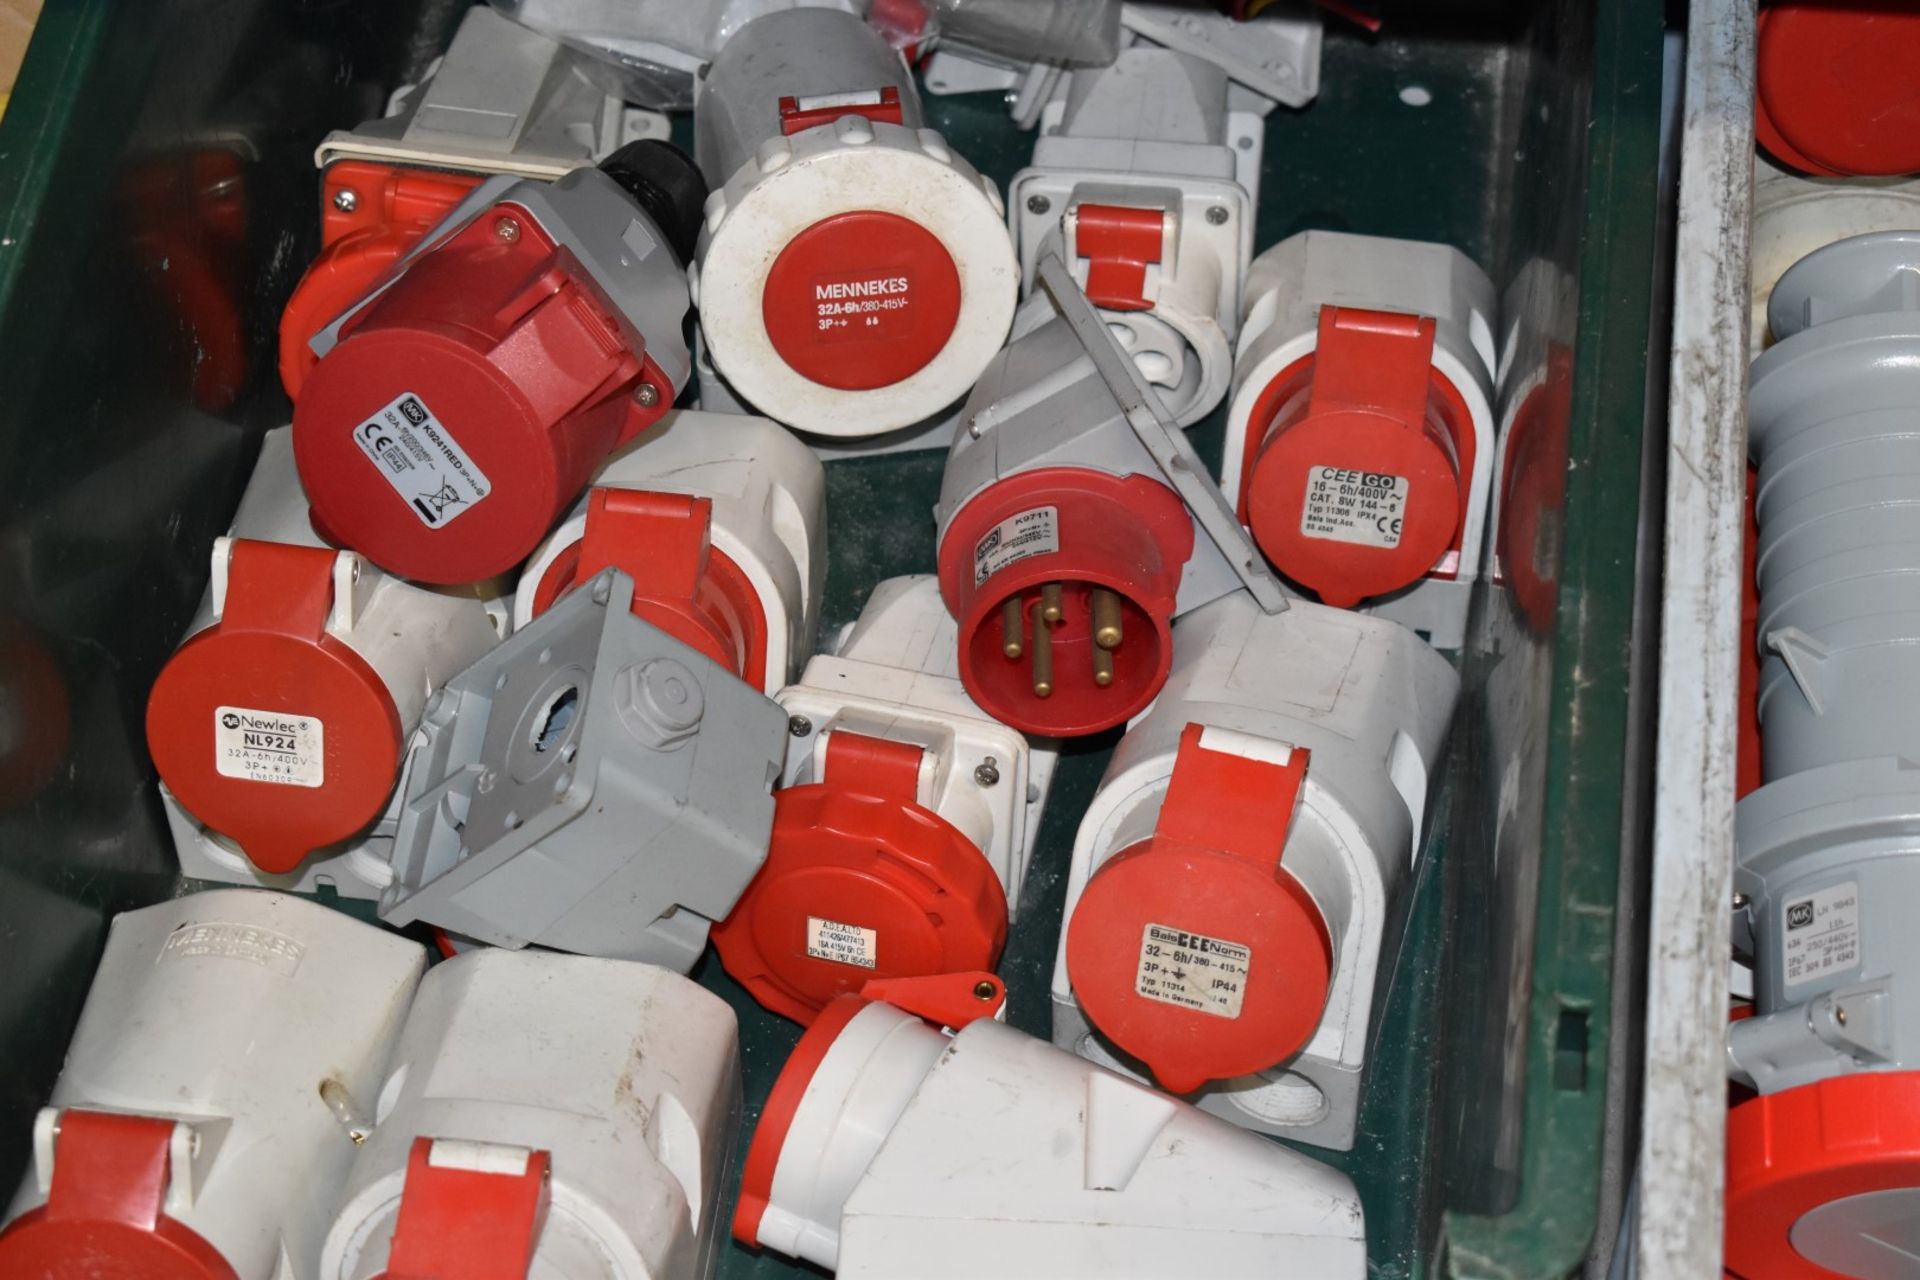 4 x Linbins With Contents - Includes Large Quantity of Industrial 3 Phase Plugs / Sockets - Image 14 of 17